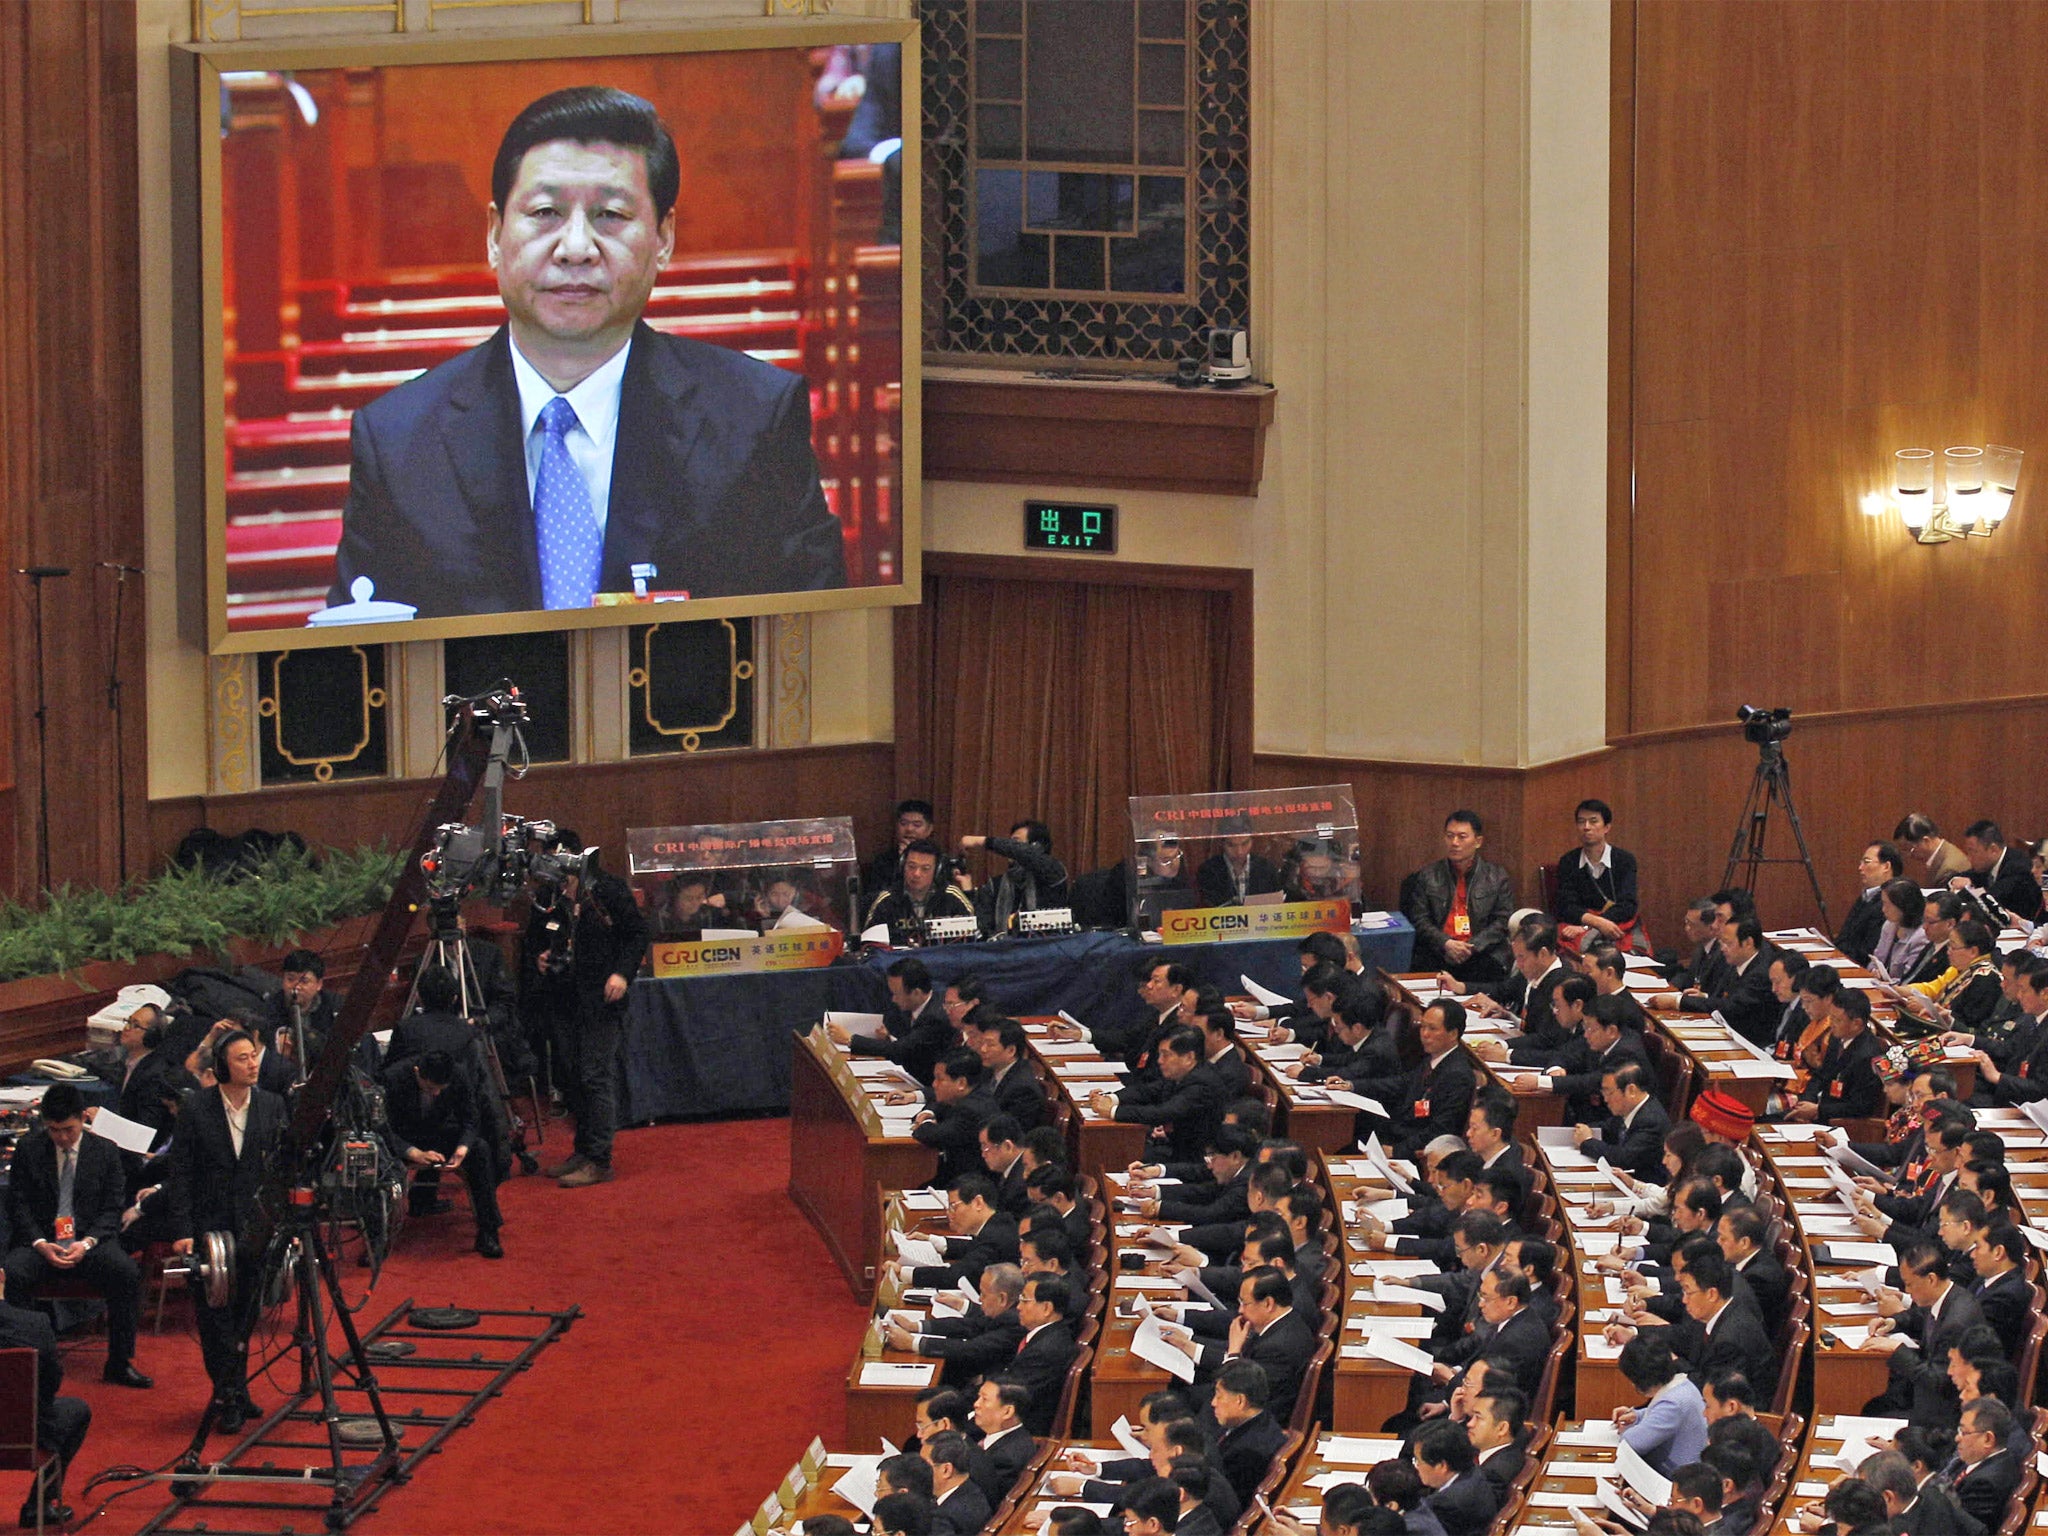 Communist Party chief Xi Jinping during the opening session of the National People's Congress in Beijing's Great Hall of the People earlier this month